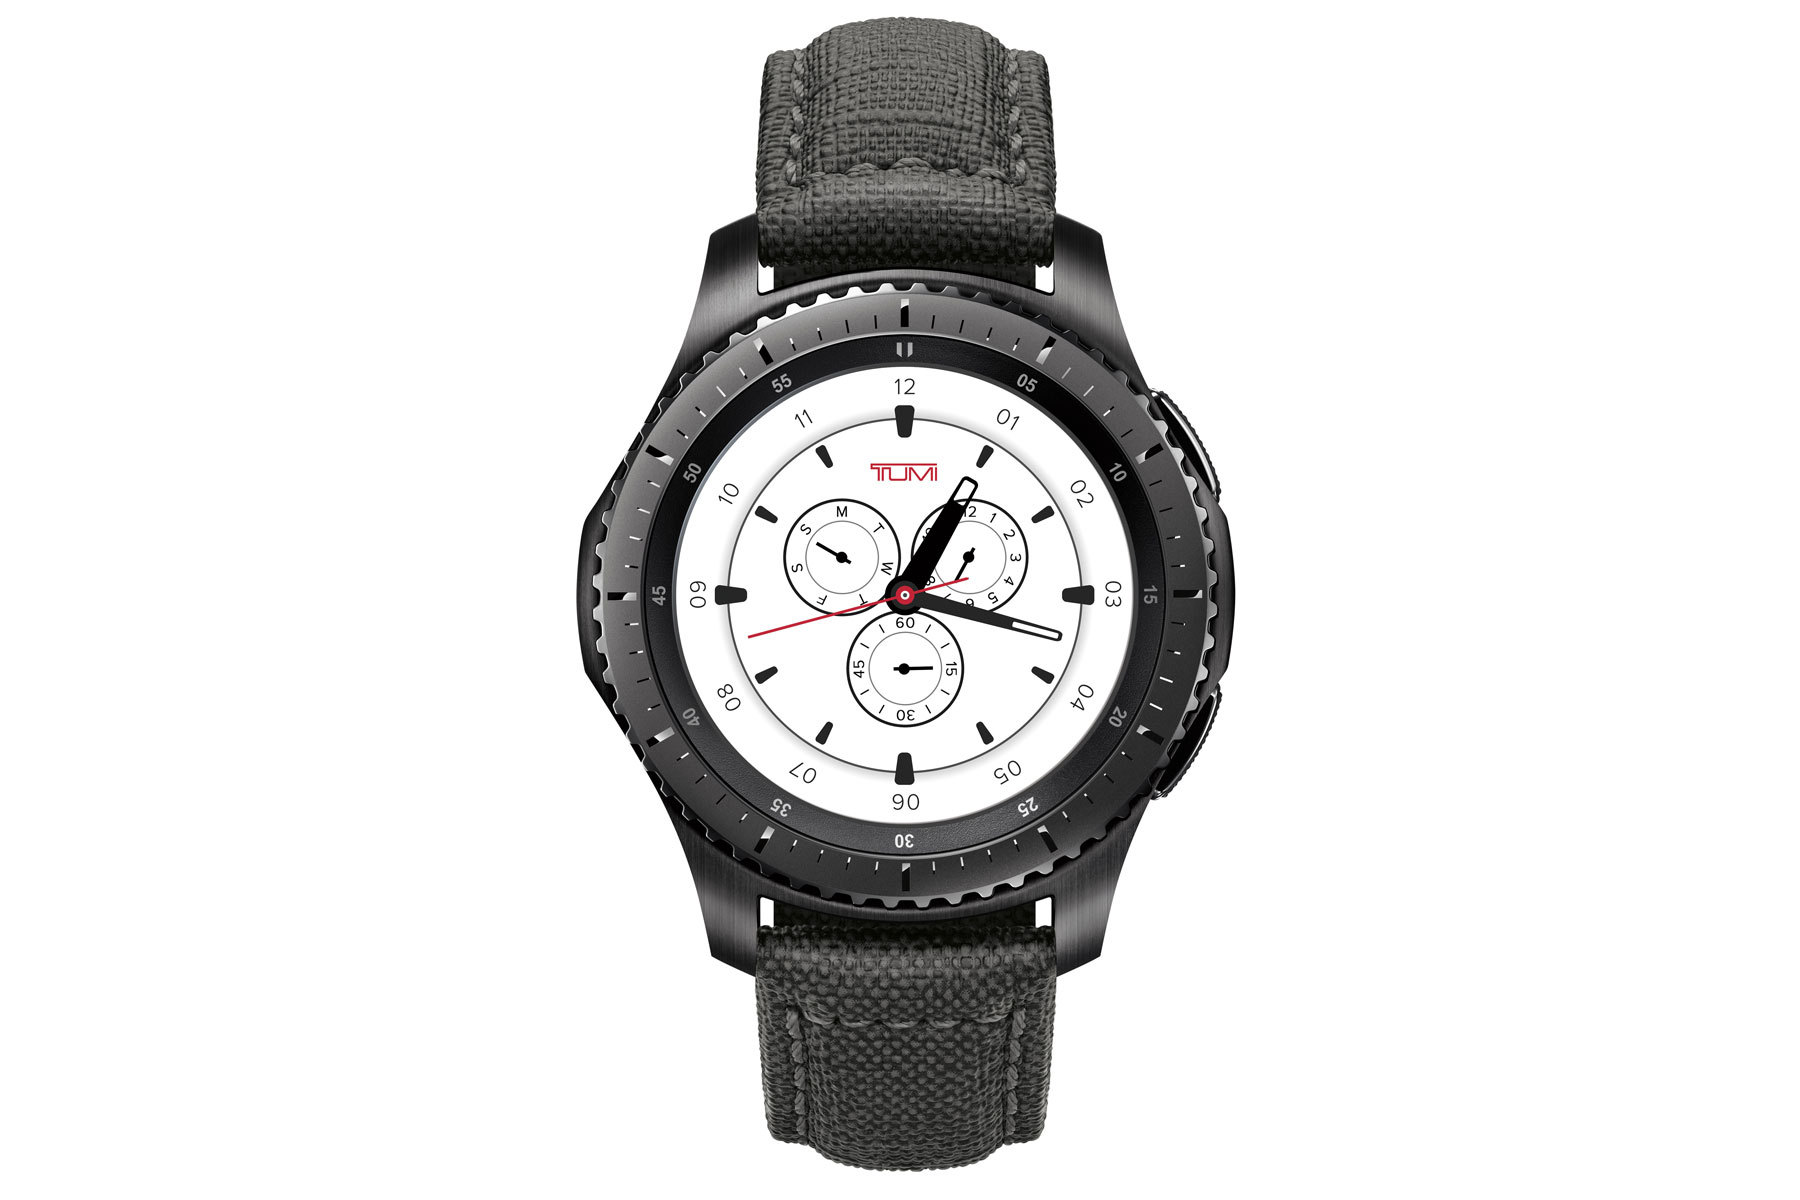 Samsung teams up with TUMI to recycle the Gear S3